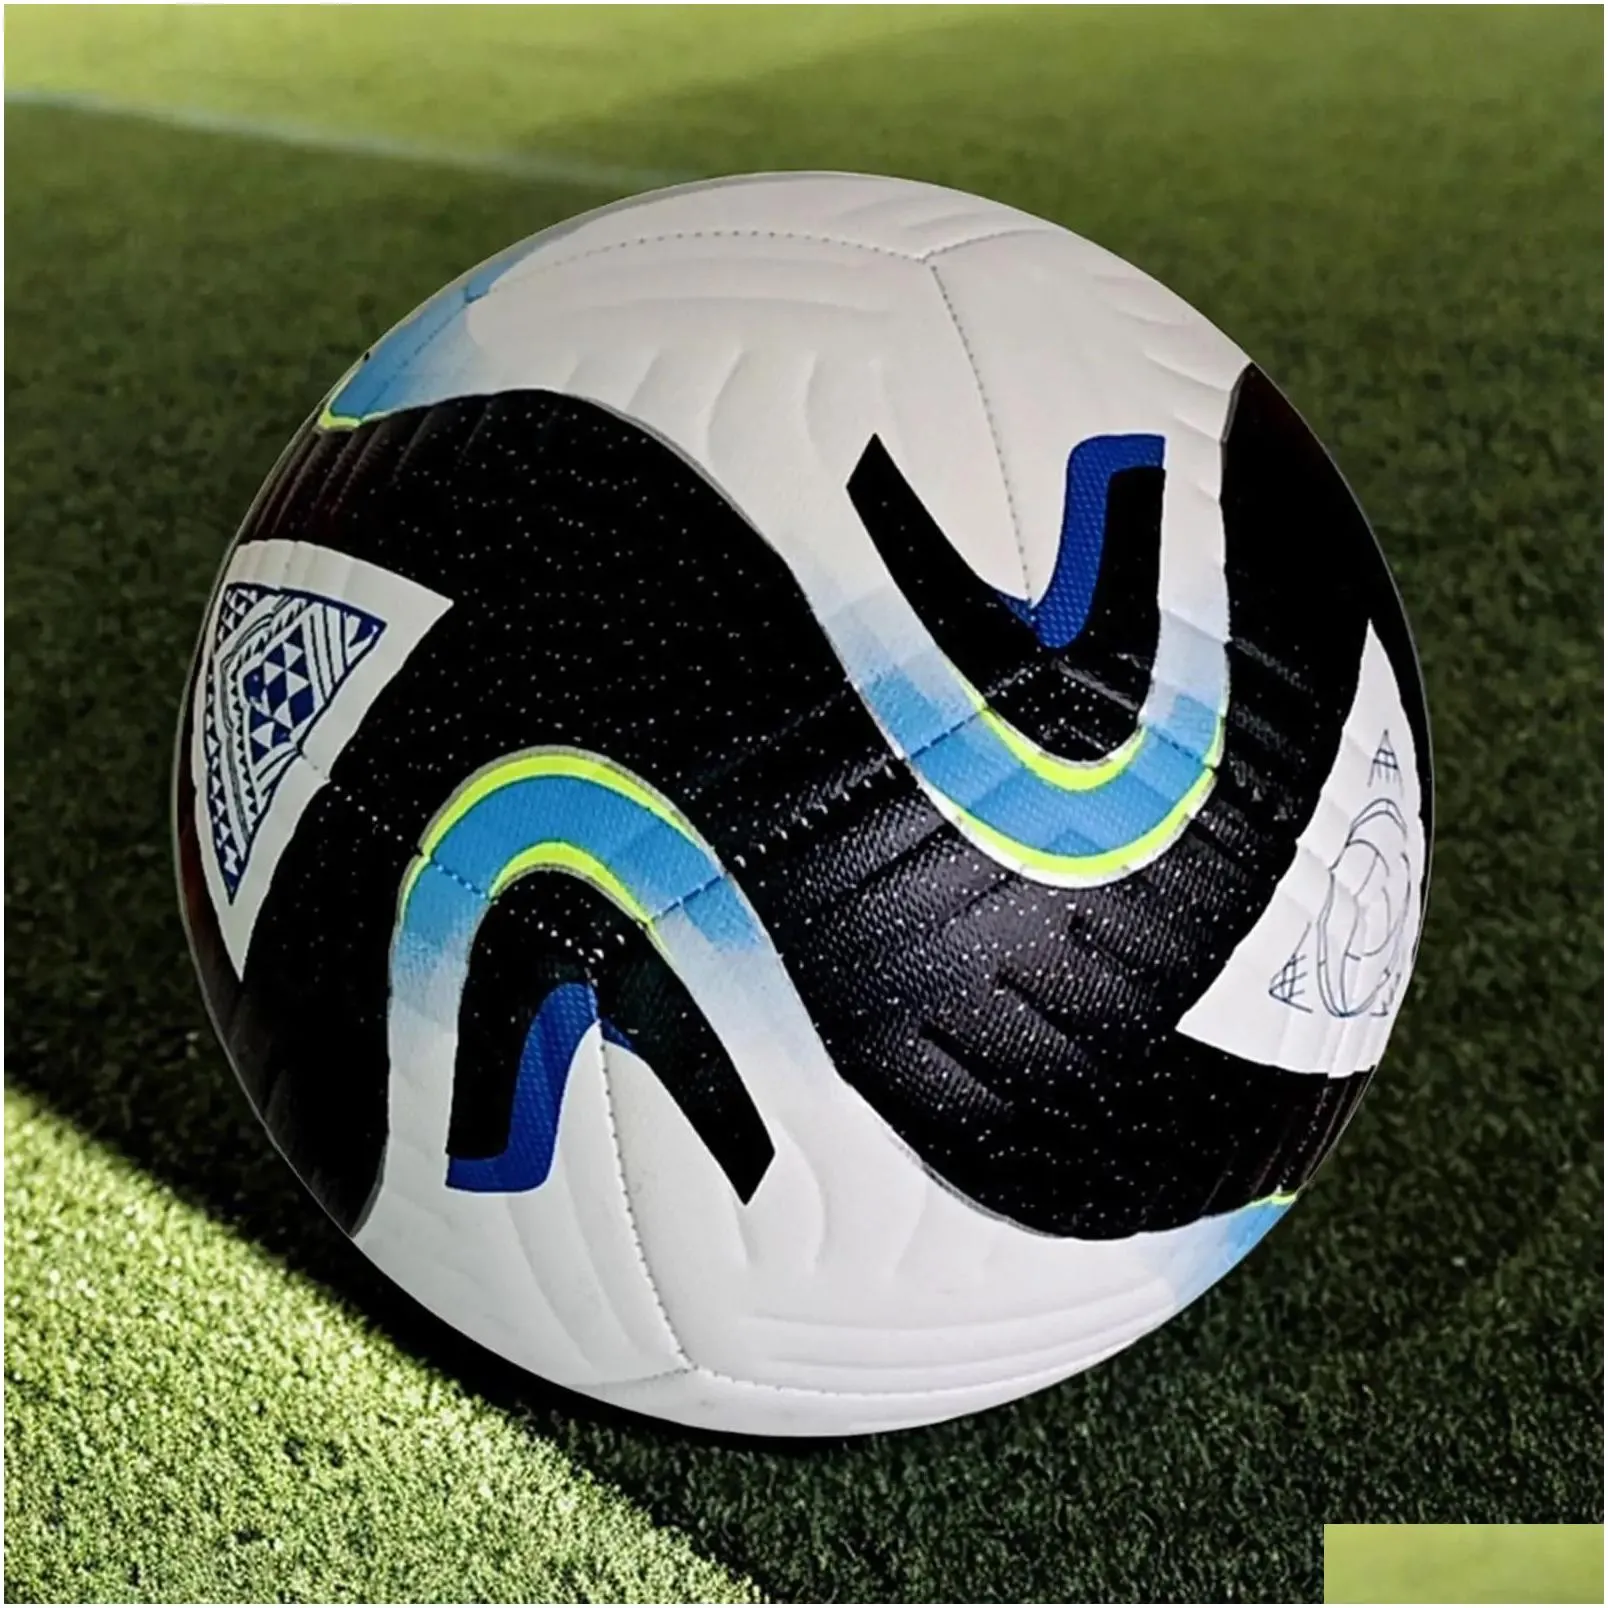 Balls Balls Soccer Ball Size 5 Seamless Stitching Football Leather Official Match 231030 Drop Delivery Sports Outdoors Athletic Outdoo Otjl9